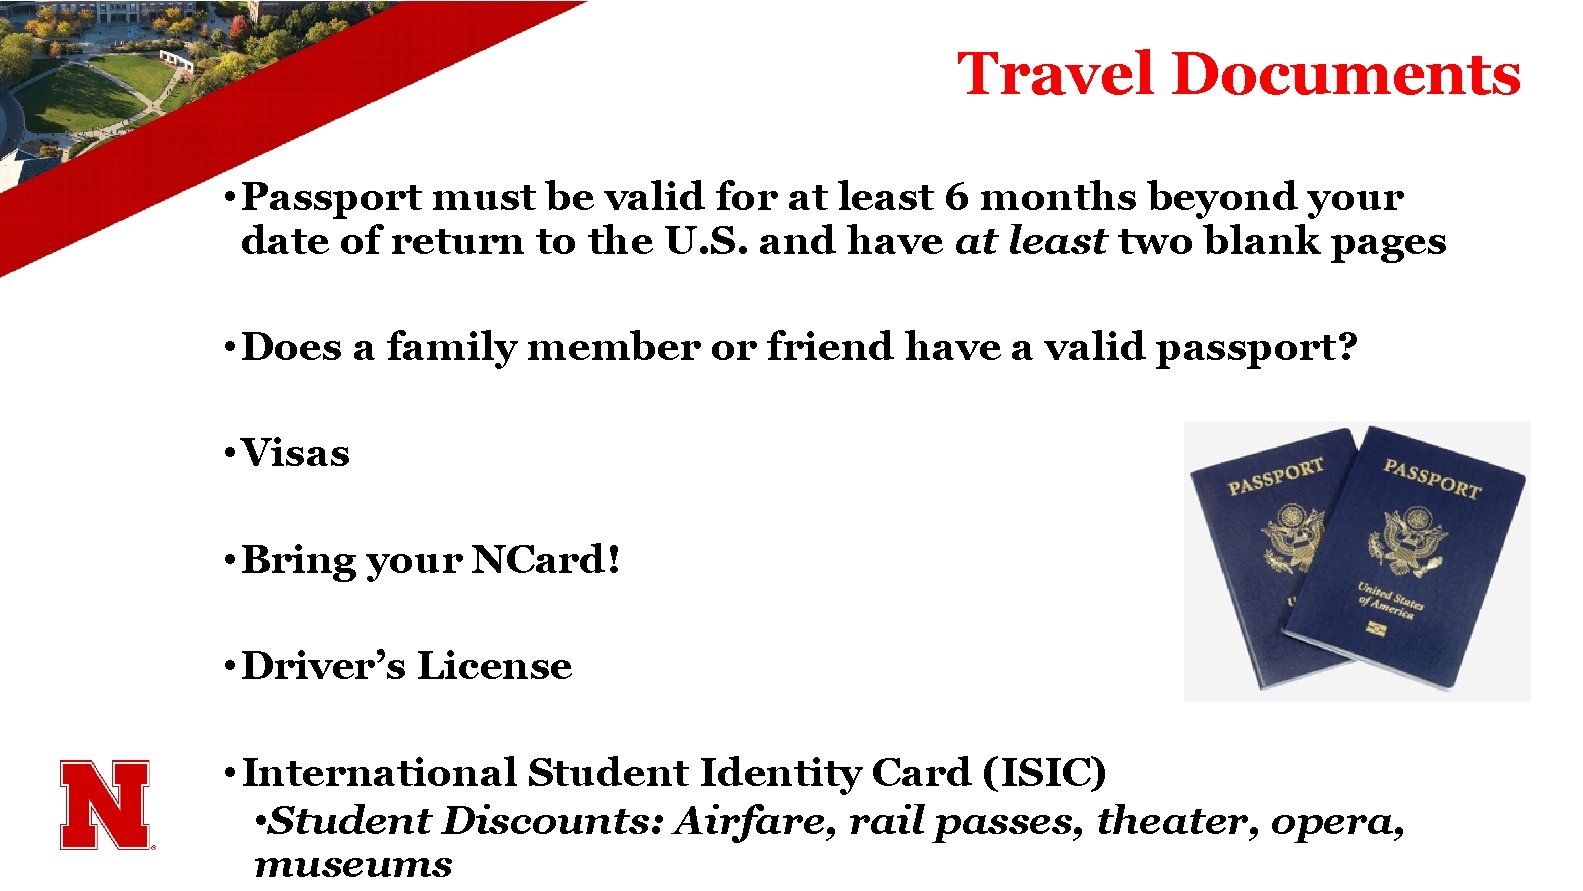 Travel Documents • Passport must be valid for at least 6 months beyond your